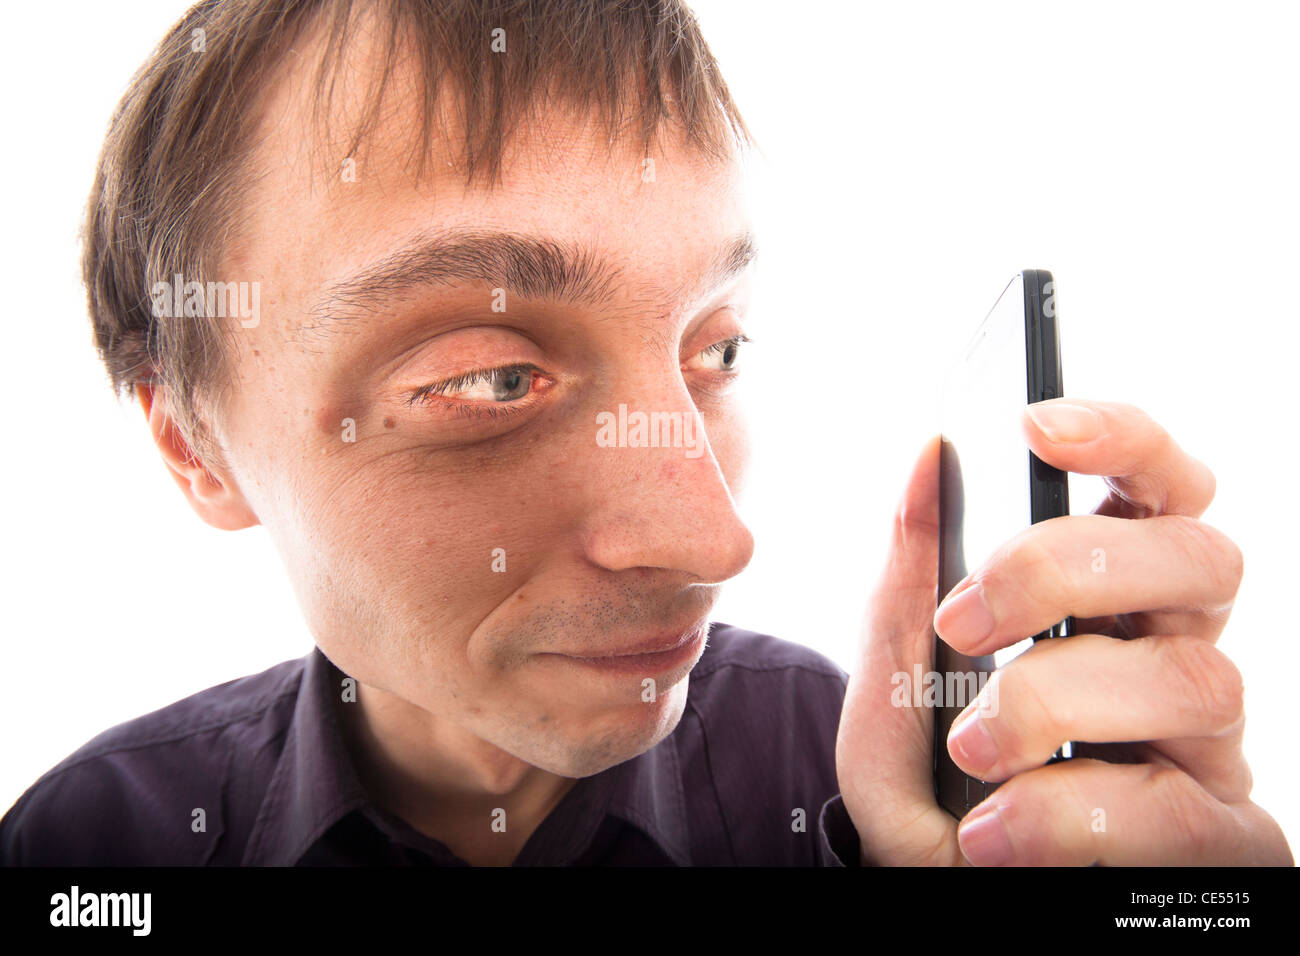 Ugly weirdo man looking at cellphone, isolated on white background. Stock Photo